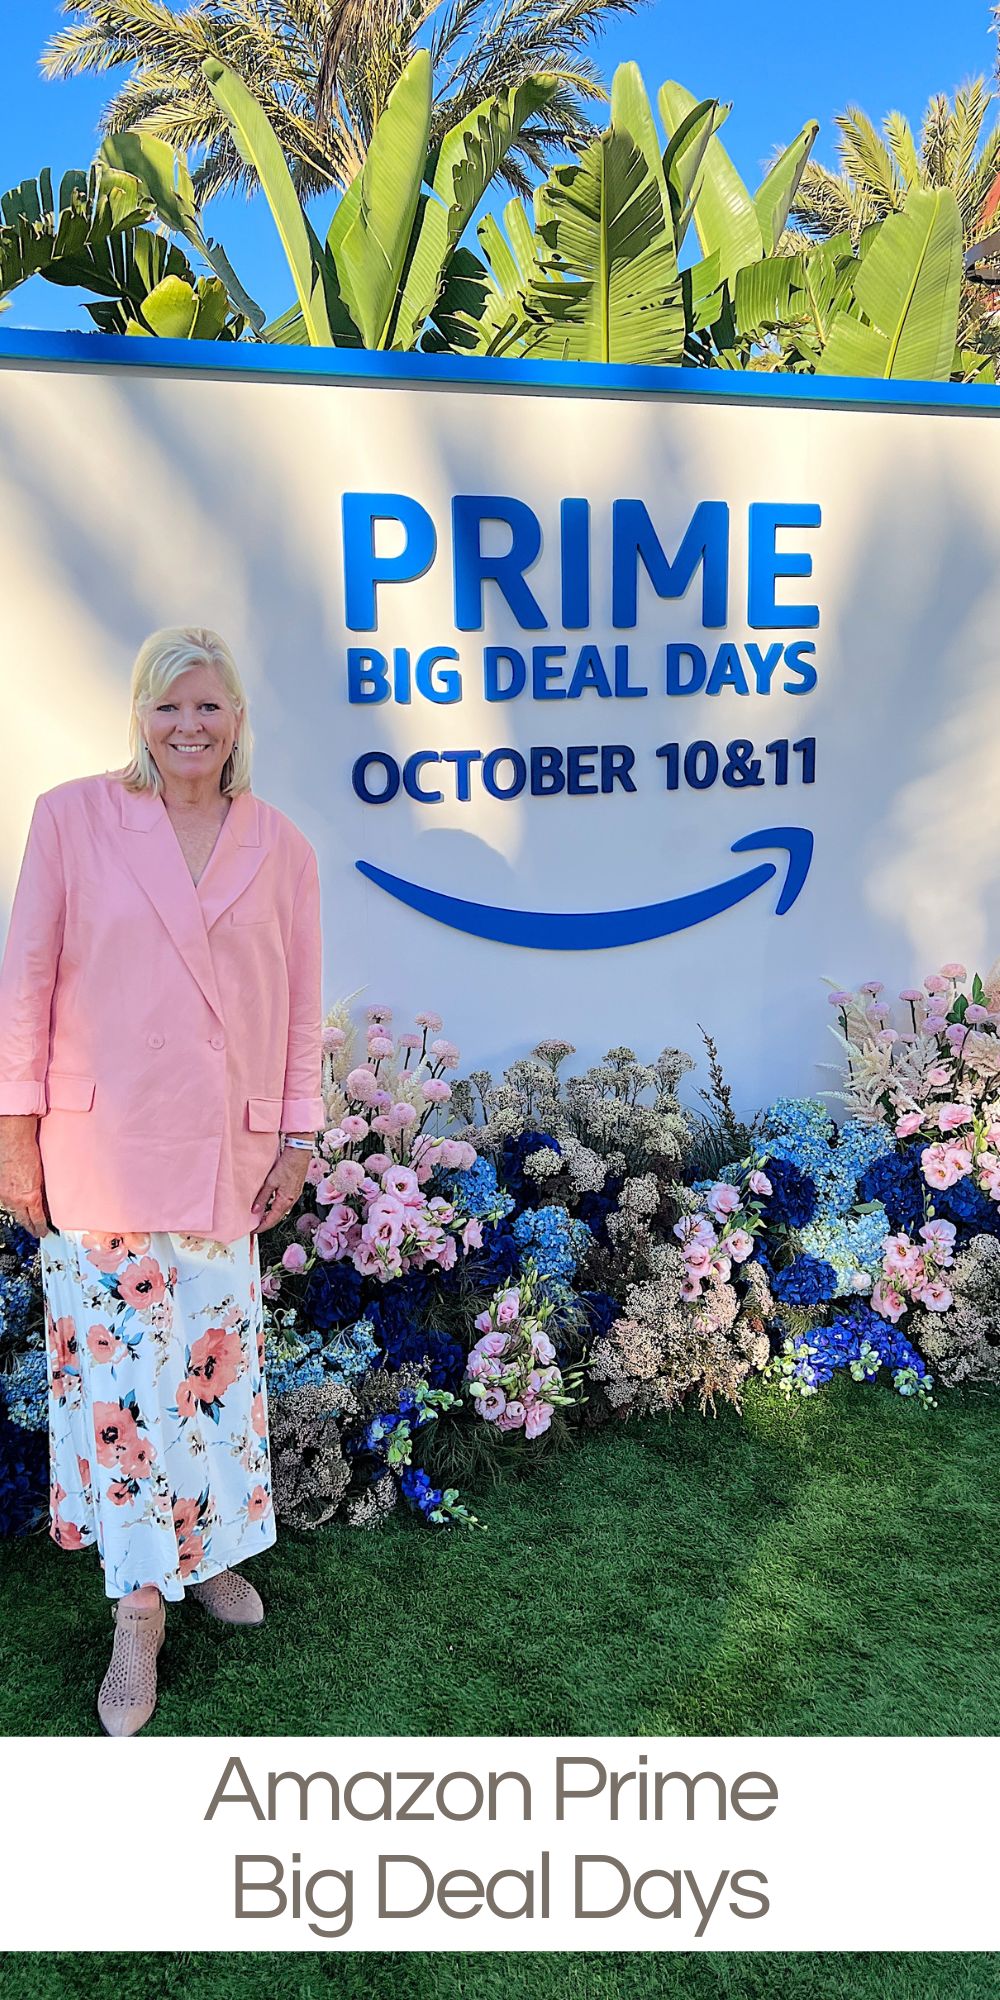 Amazon Prime Big Deal Days are this Tuesday and Wednesday so you have a few days to get ready. Holiday shopping, here we come!